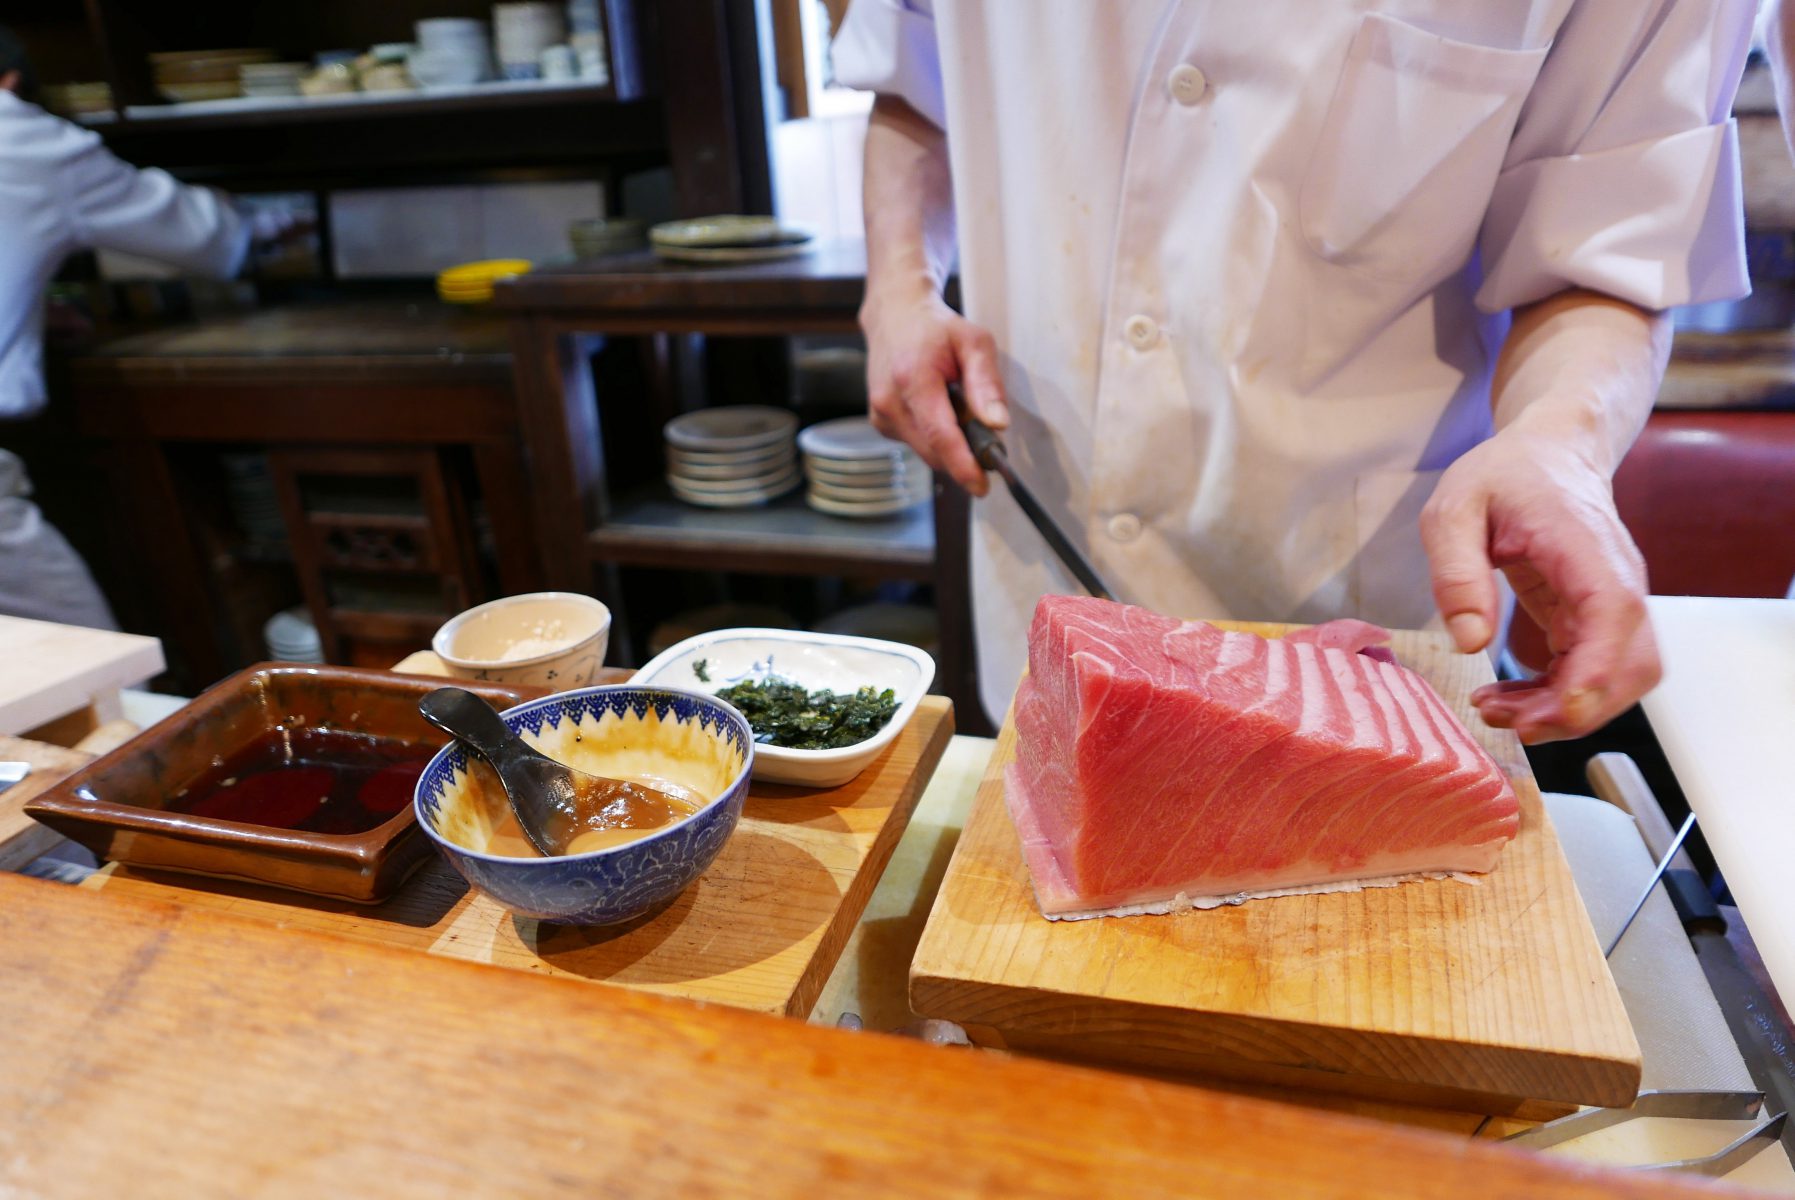 Otoro was briefly marinated in soy